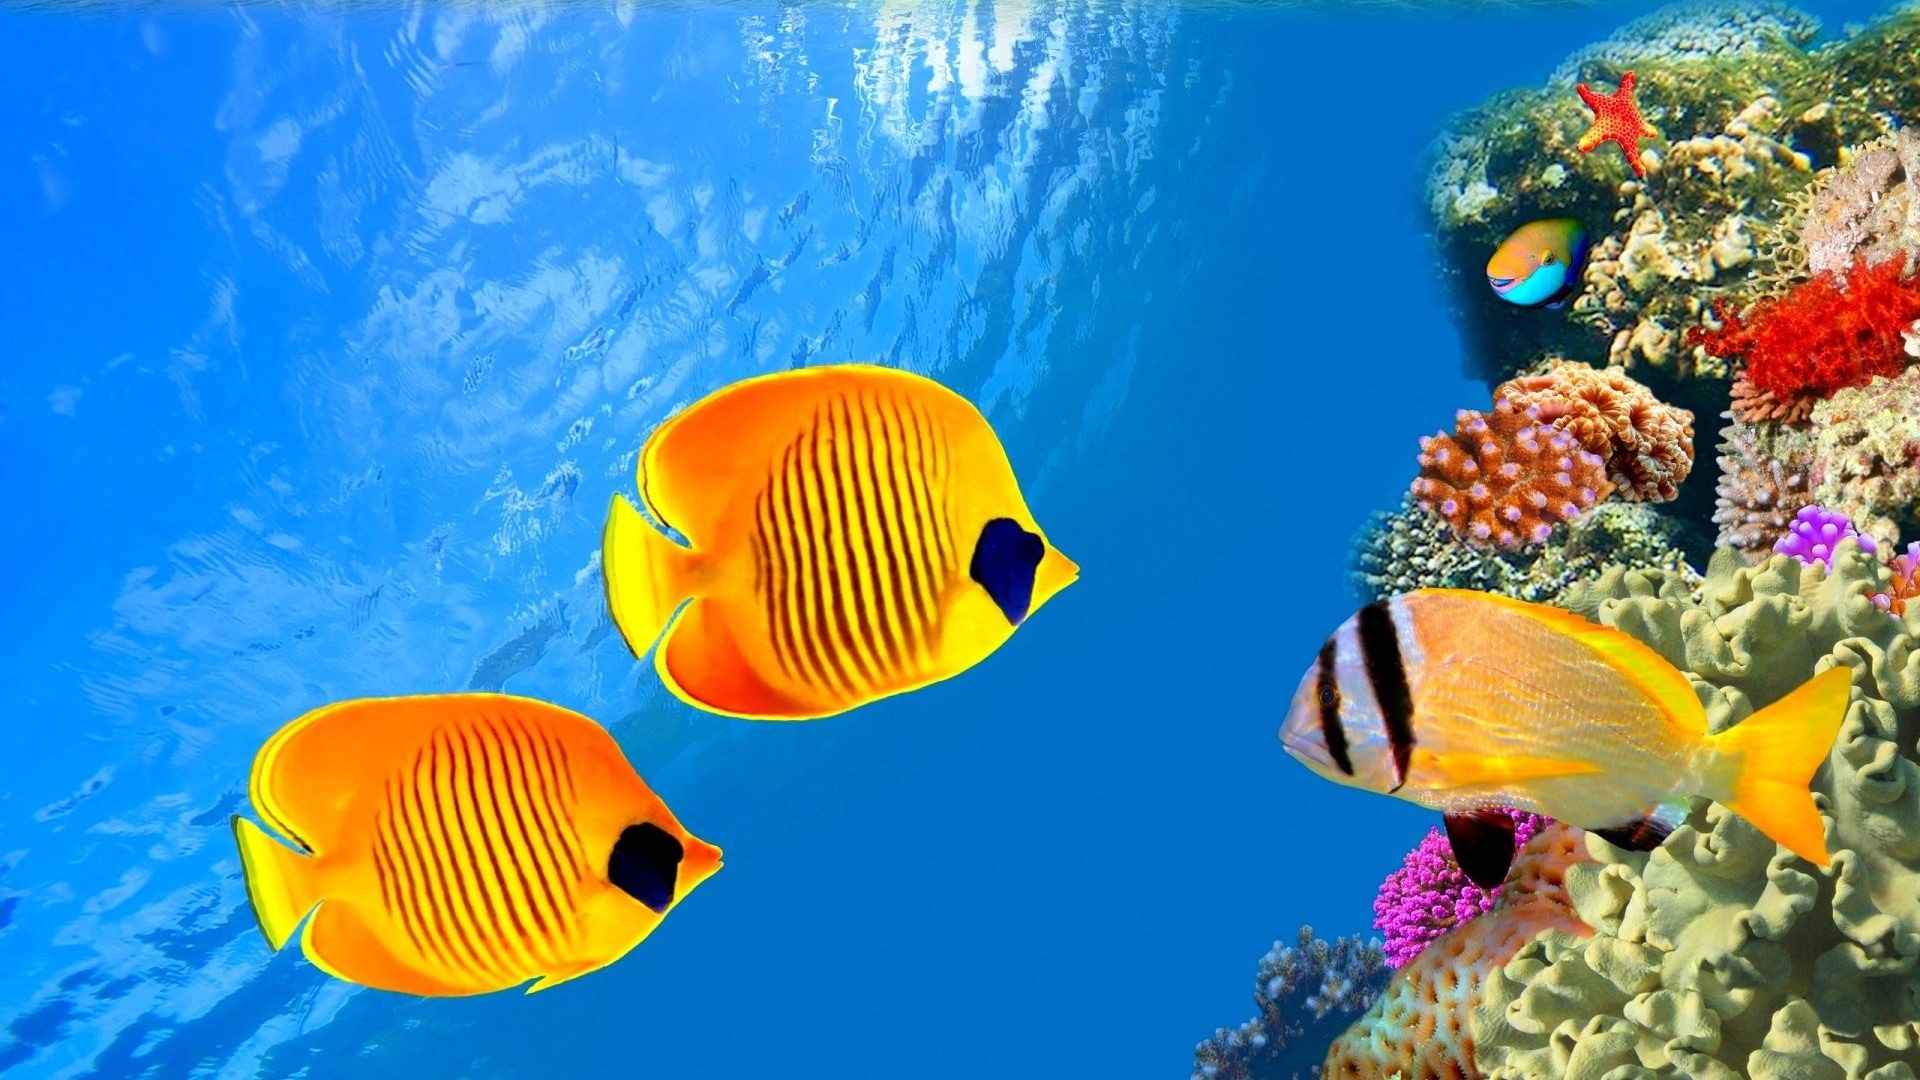 1920x1080 Sealife Tag - Nature Fish Sea Underwater Fishes Ocean Sealife Moving Hd  Wallpaper for HD 16